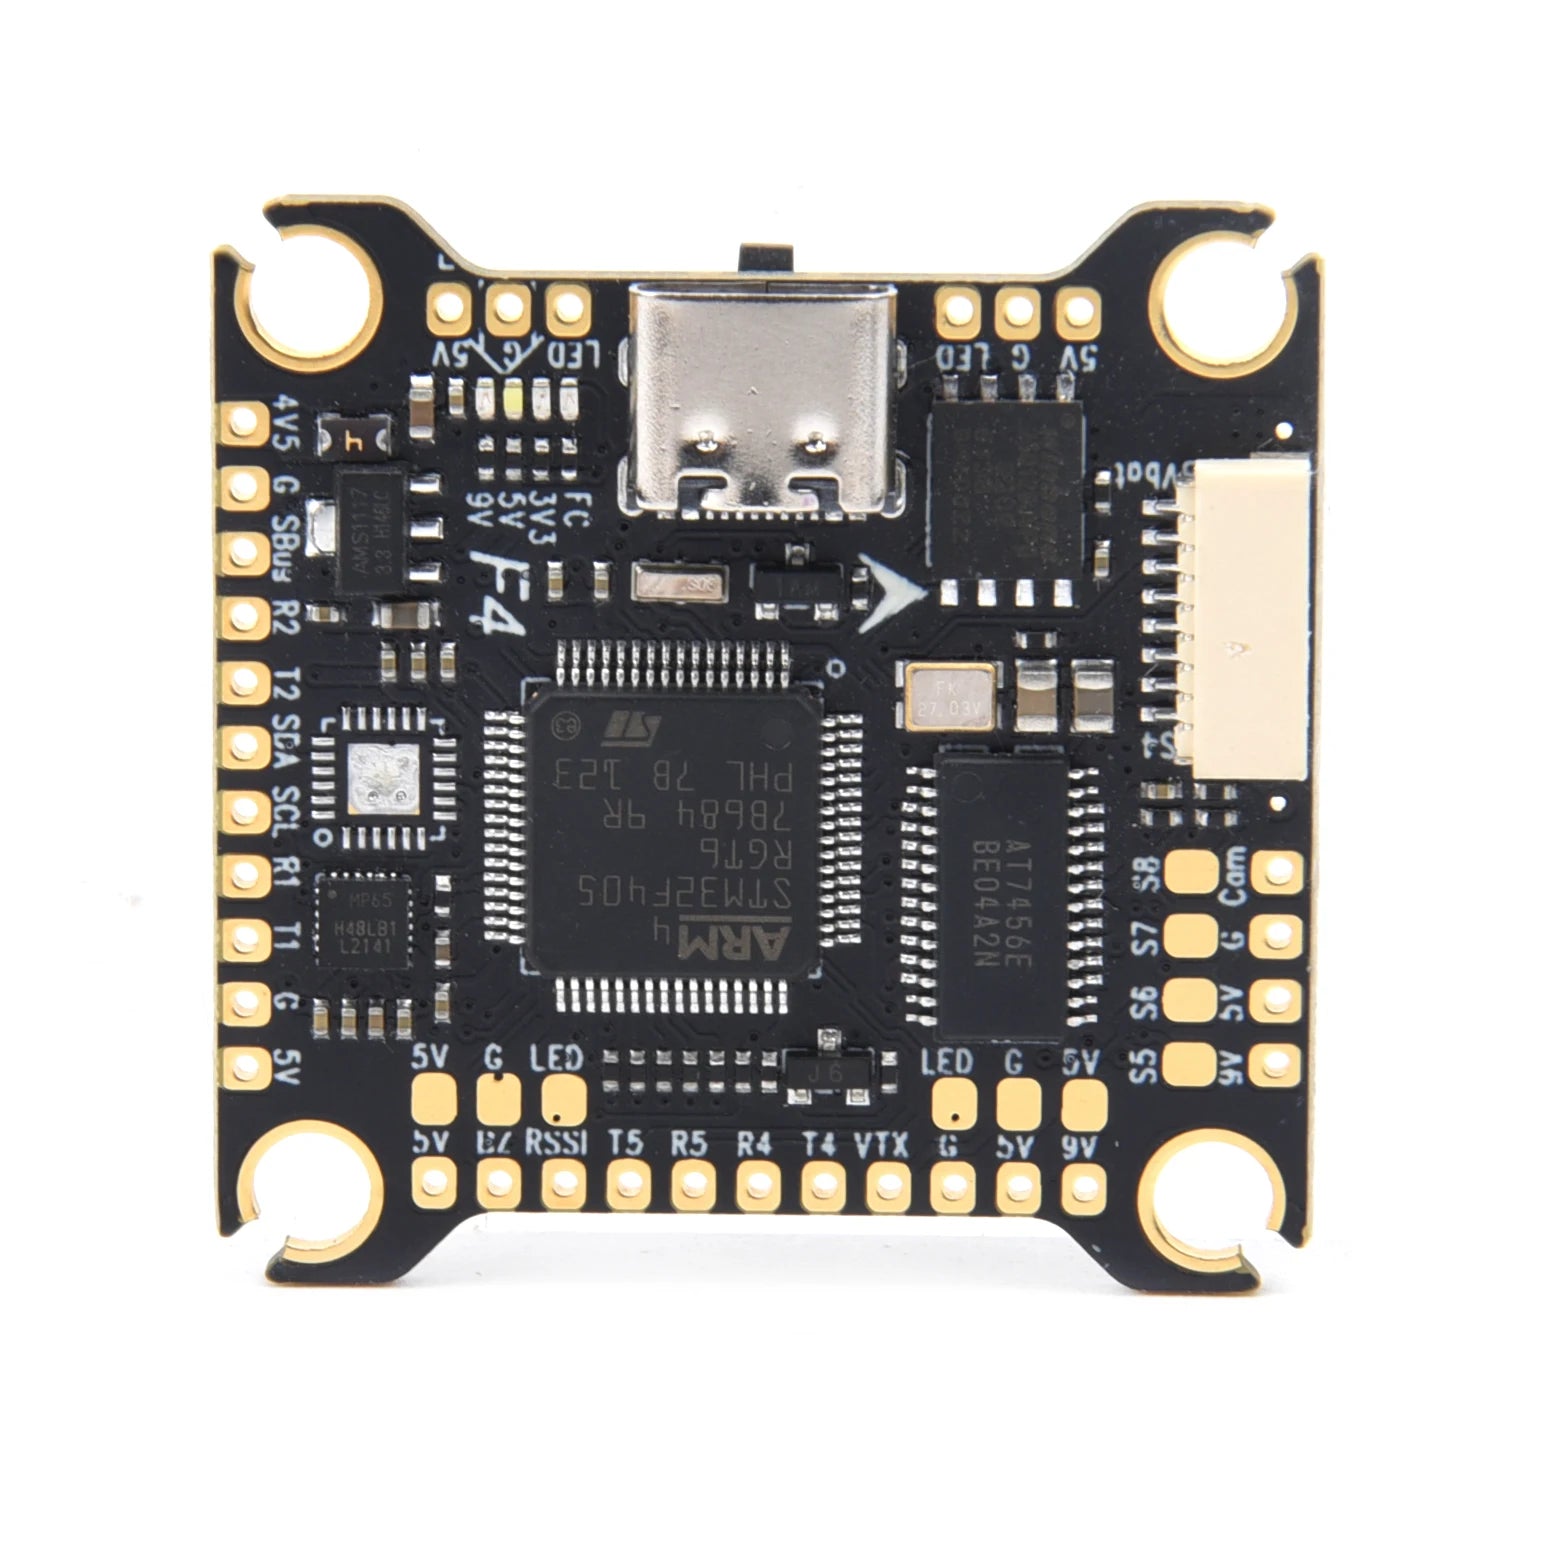 this board uses the more powerful STM F4 processor for even faster loop times .